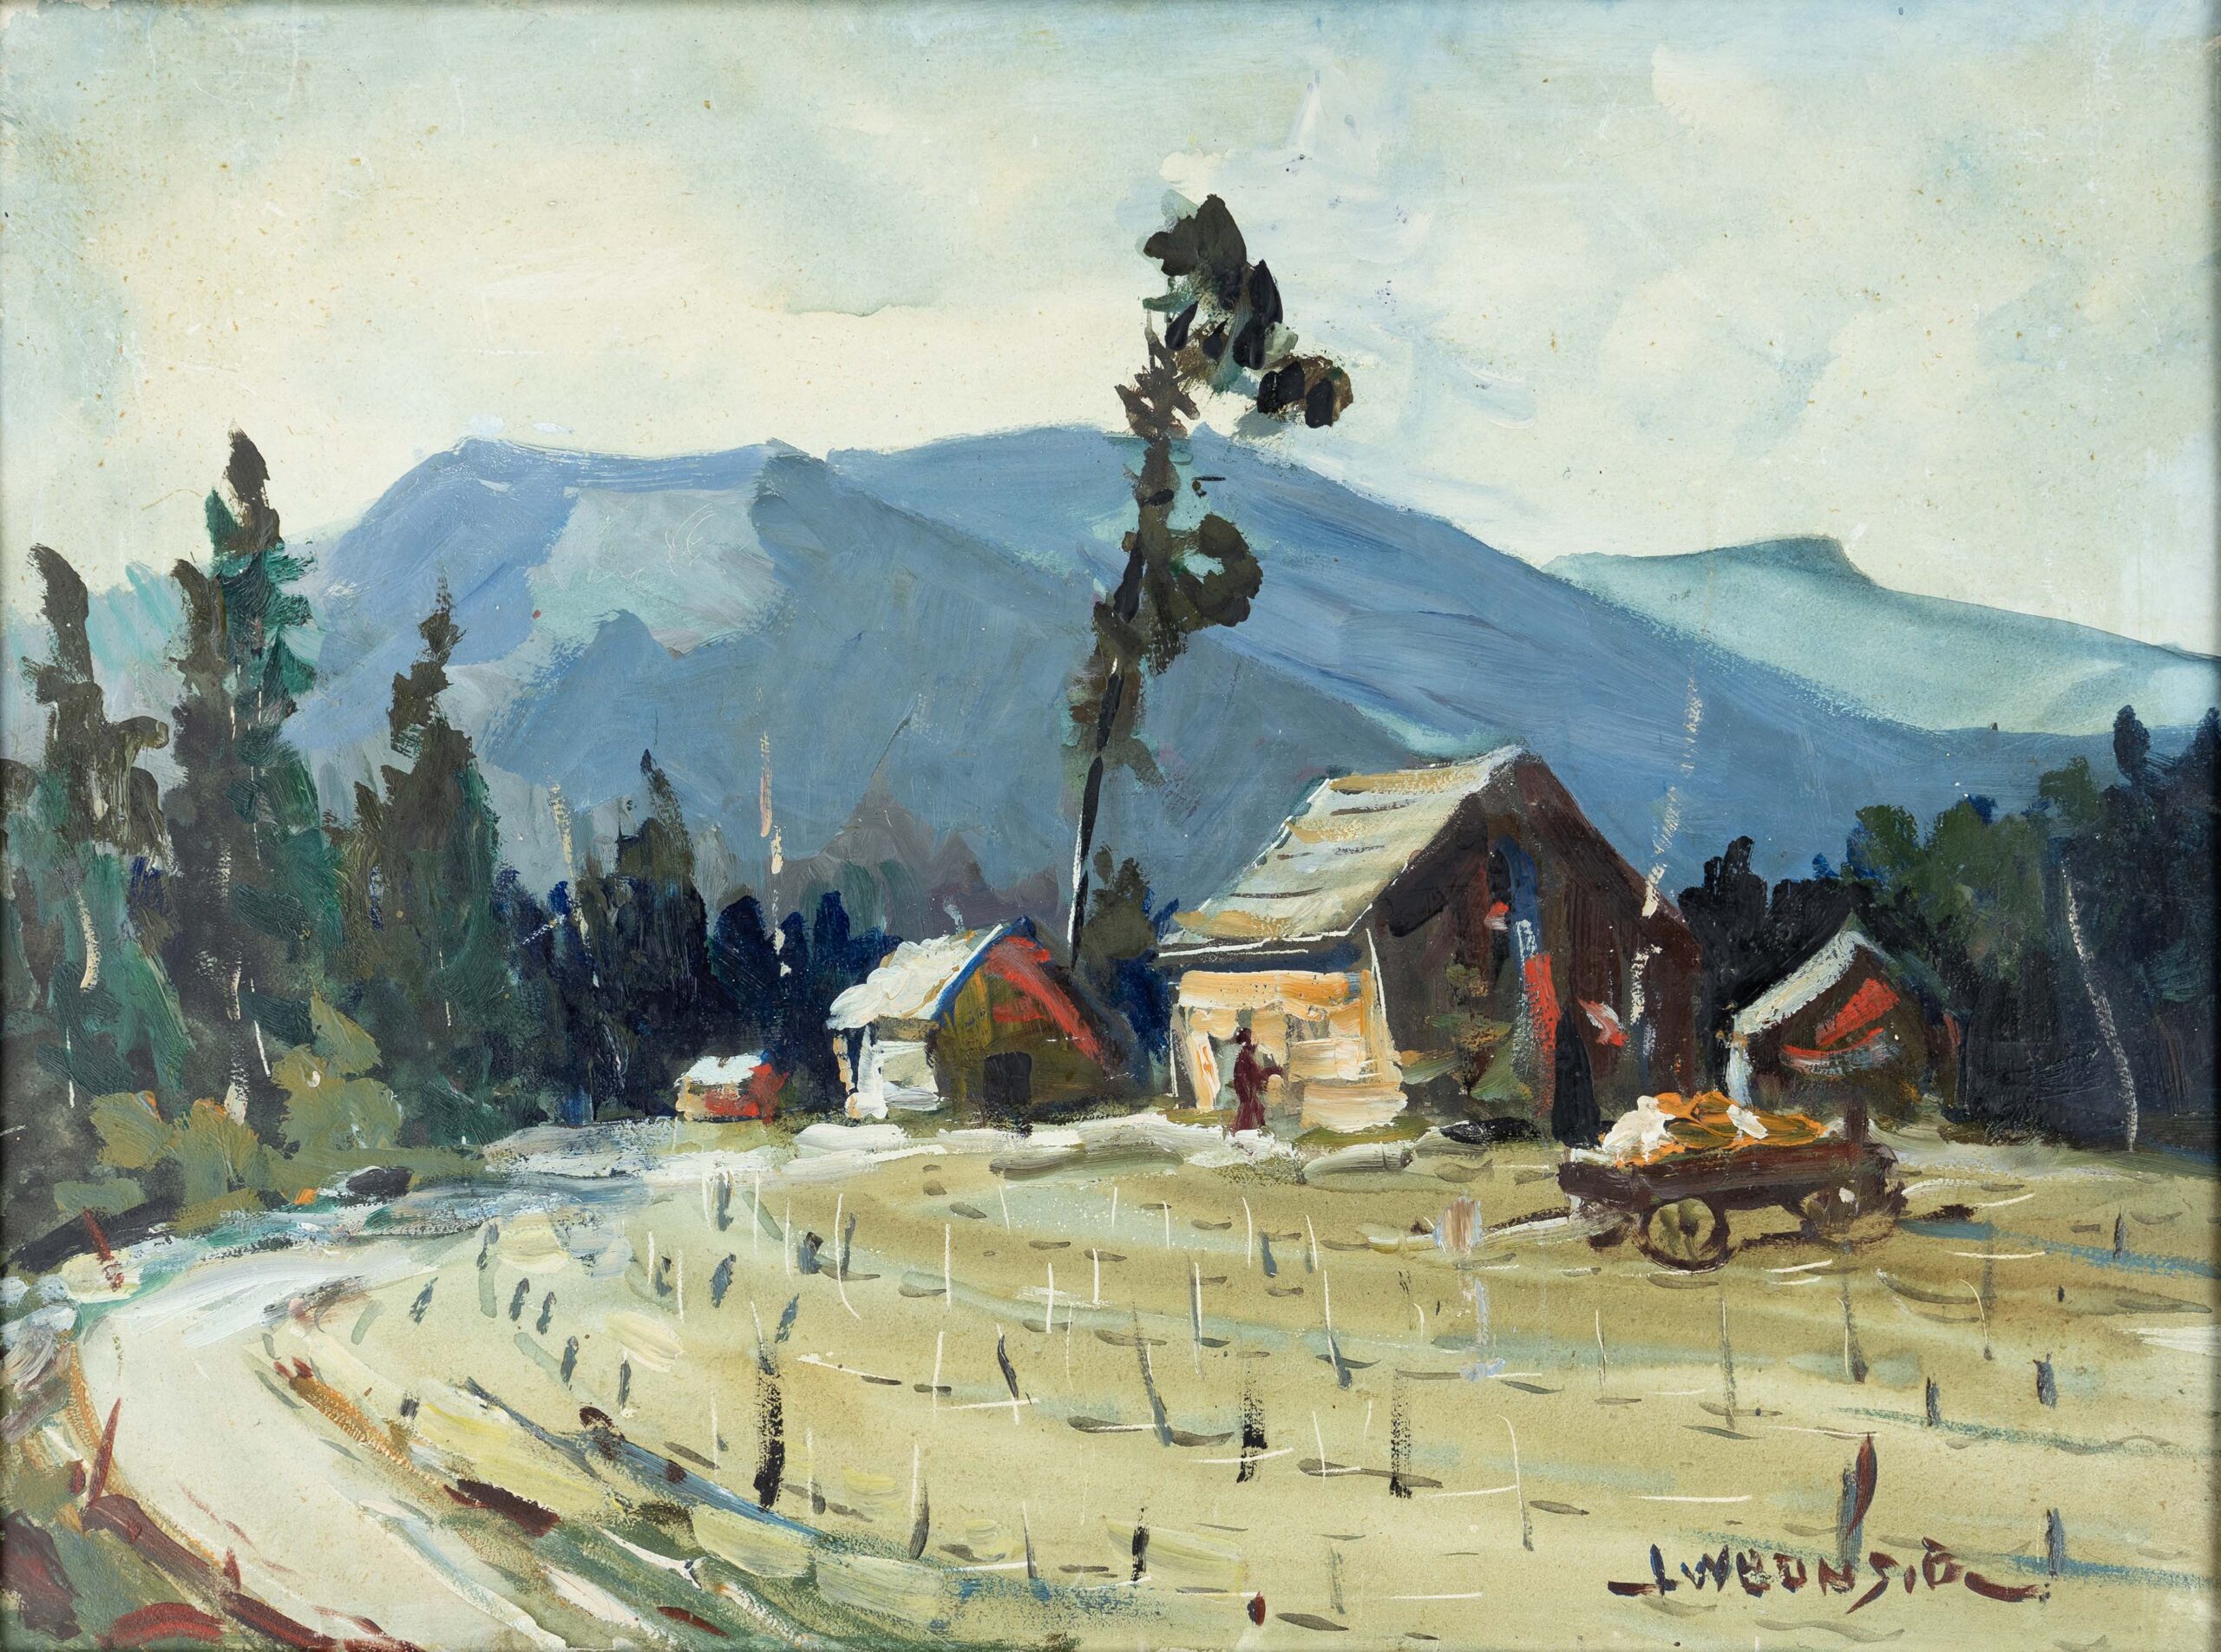 Louis Bonsib, "Emerts Cove," not dated, oil on board, 12 x 16 inches. Courtesy of Allen & Barry Huffman, Asheville Art Museum